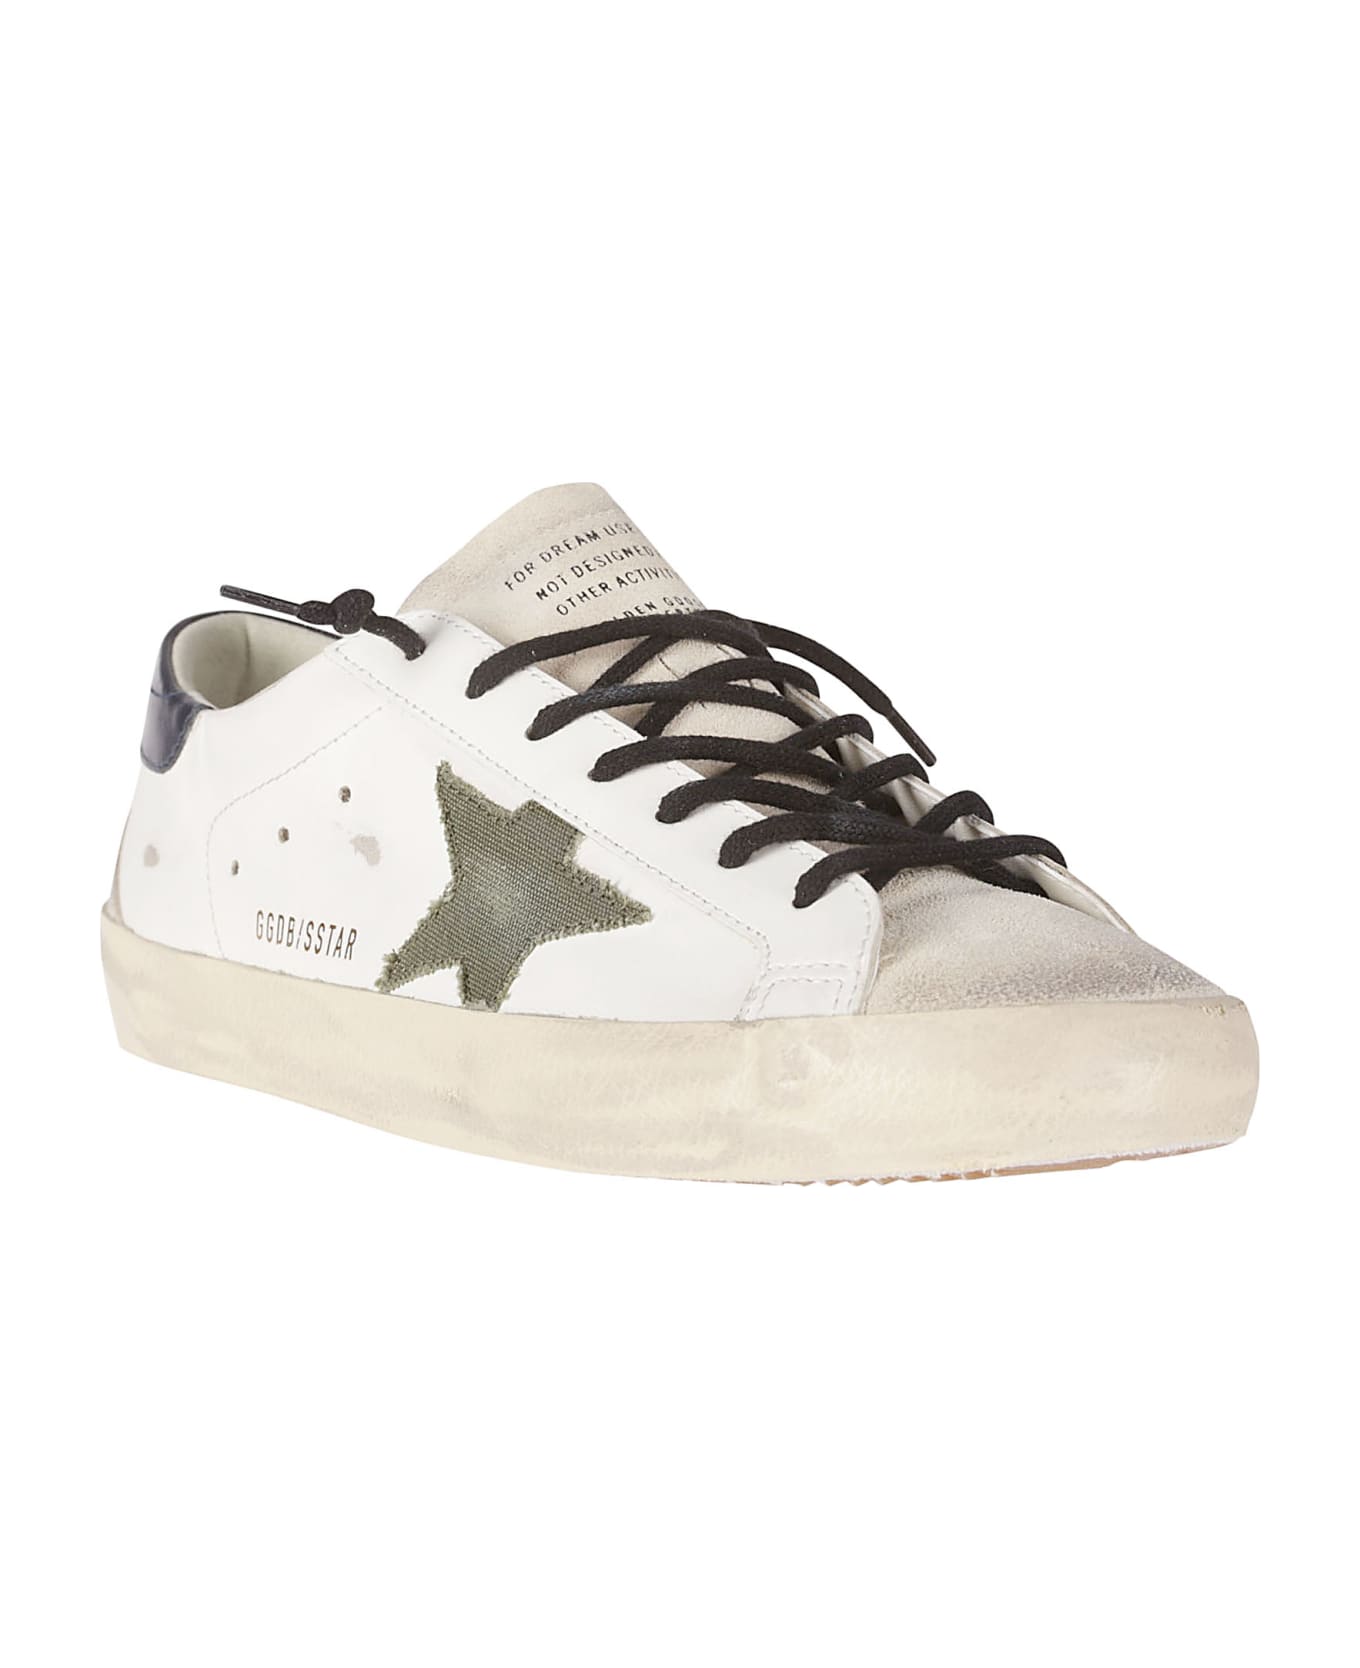 Golden Goose Super-star Sneakers With A Worn Effect - WHITE/SEEDPEARL/GREEN/BLUE スニーカー